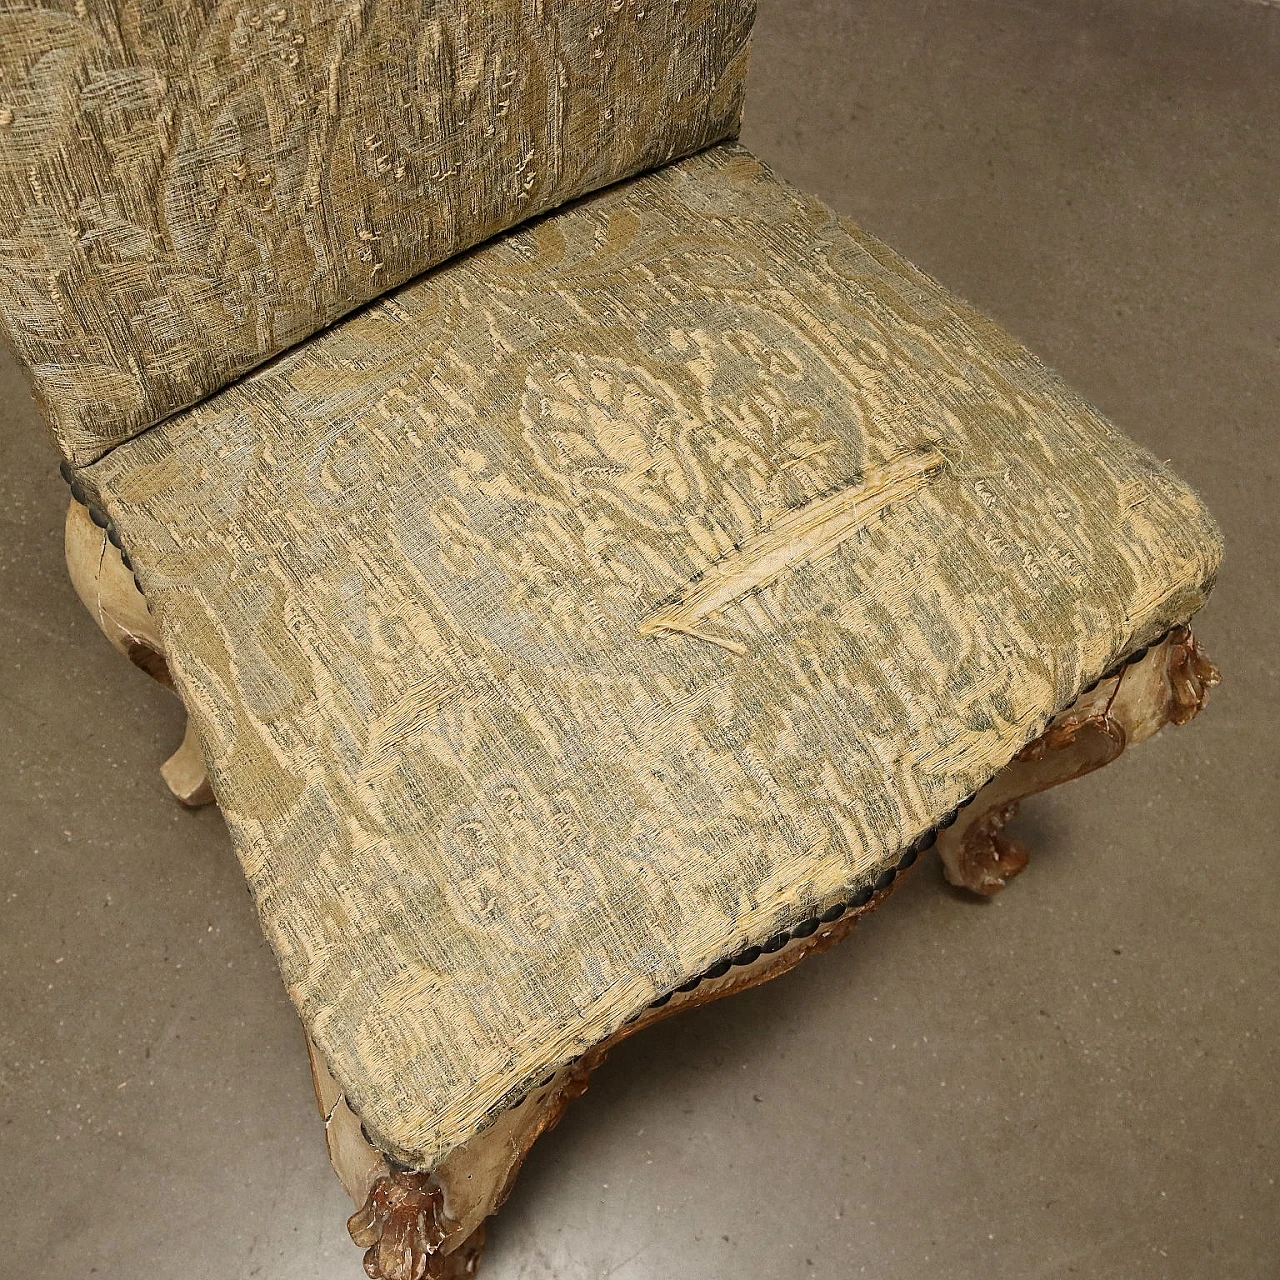 Pair of gilt chairs with leaf motifs & brocade fabric, 19th century 9